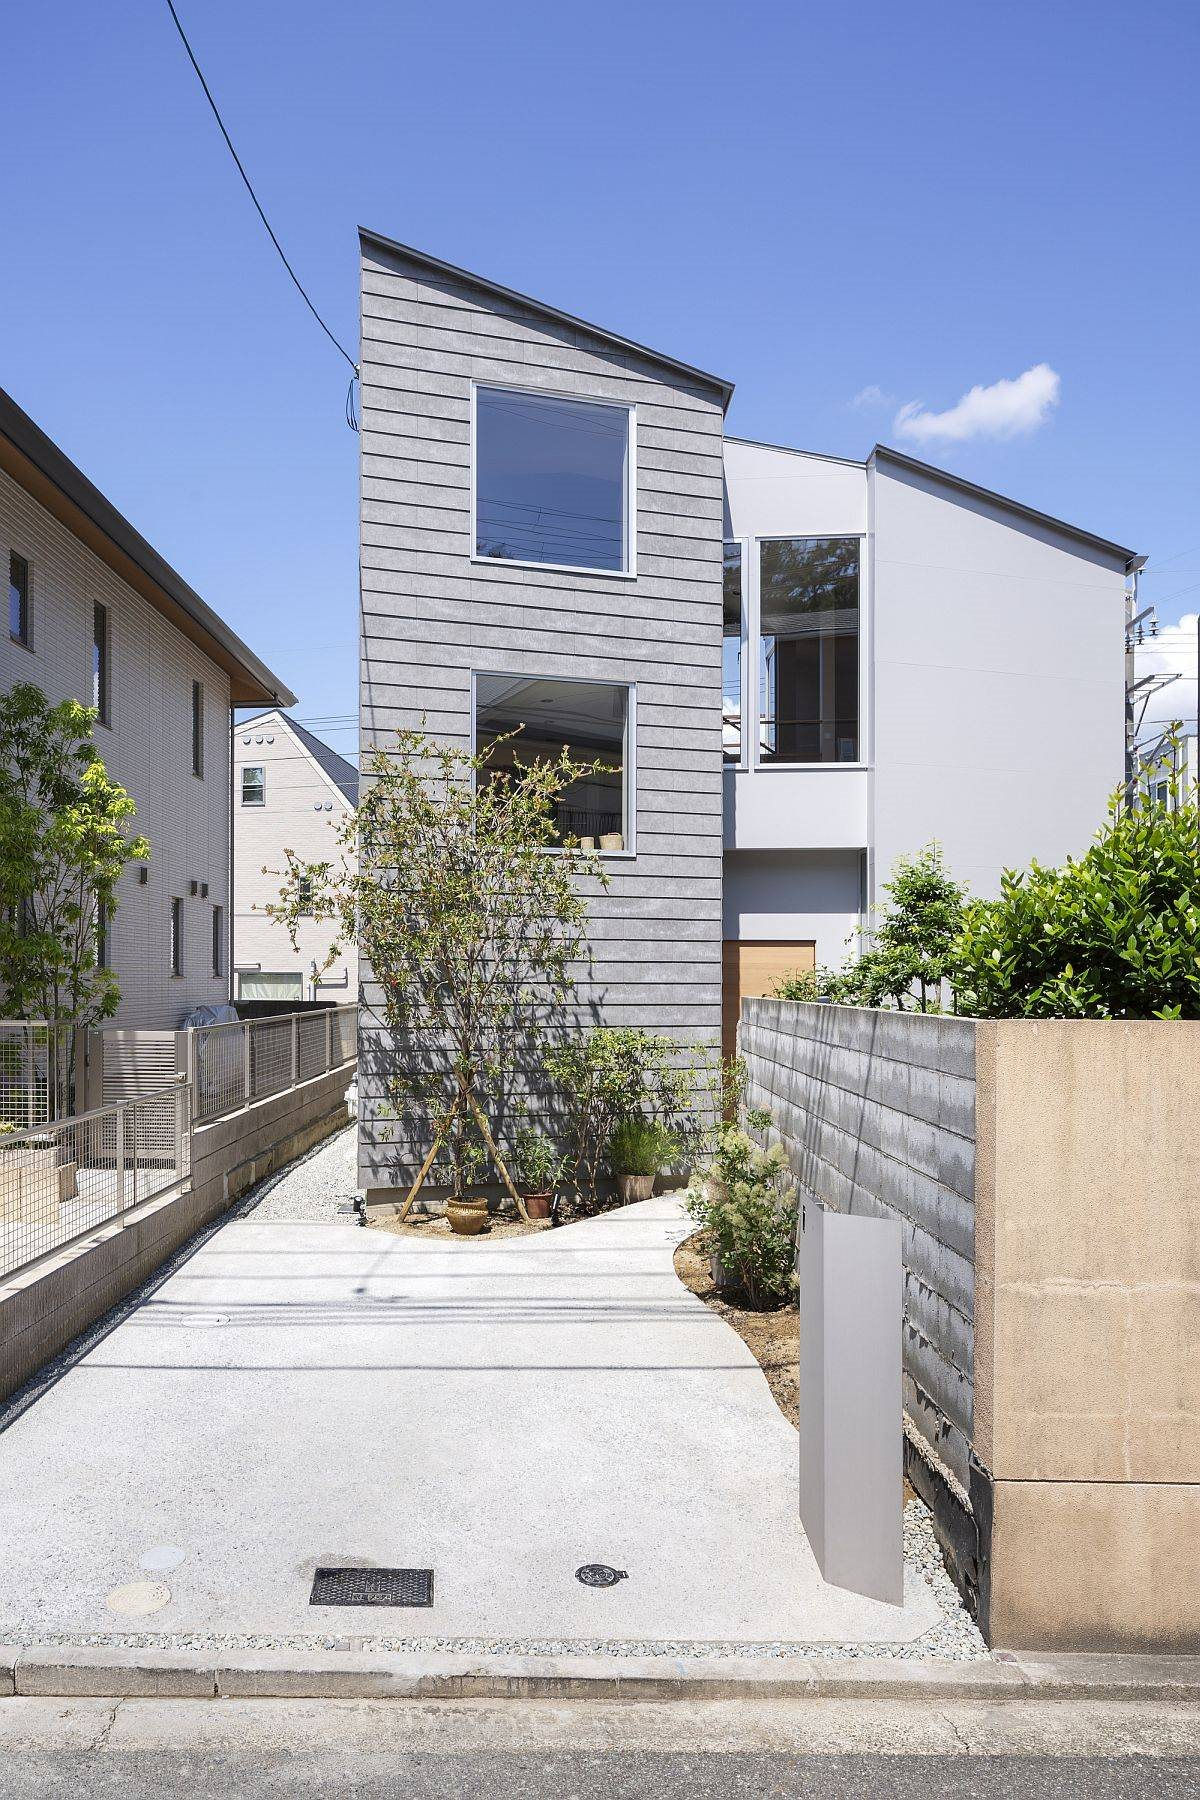 smart-and-space-savvy-japanese-home-has-been-set-back-on-the-lot-78547.jpg